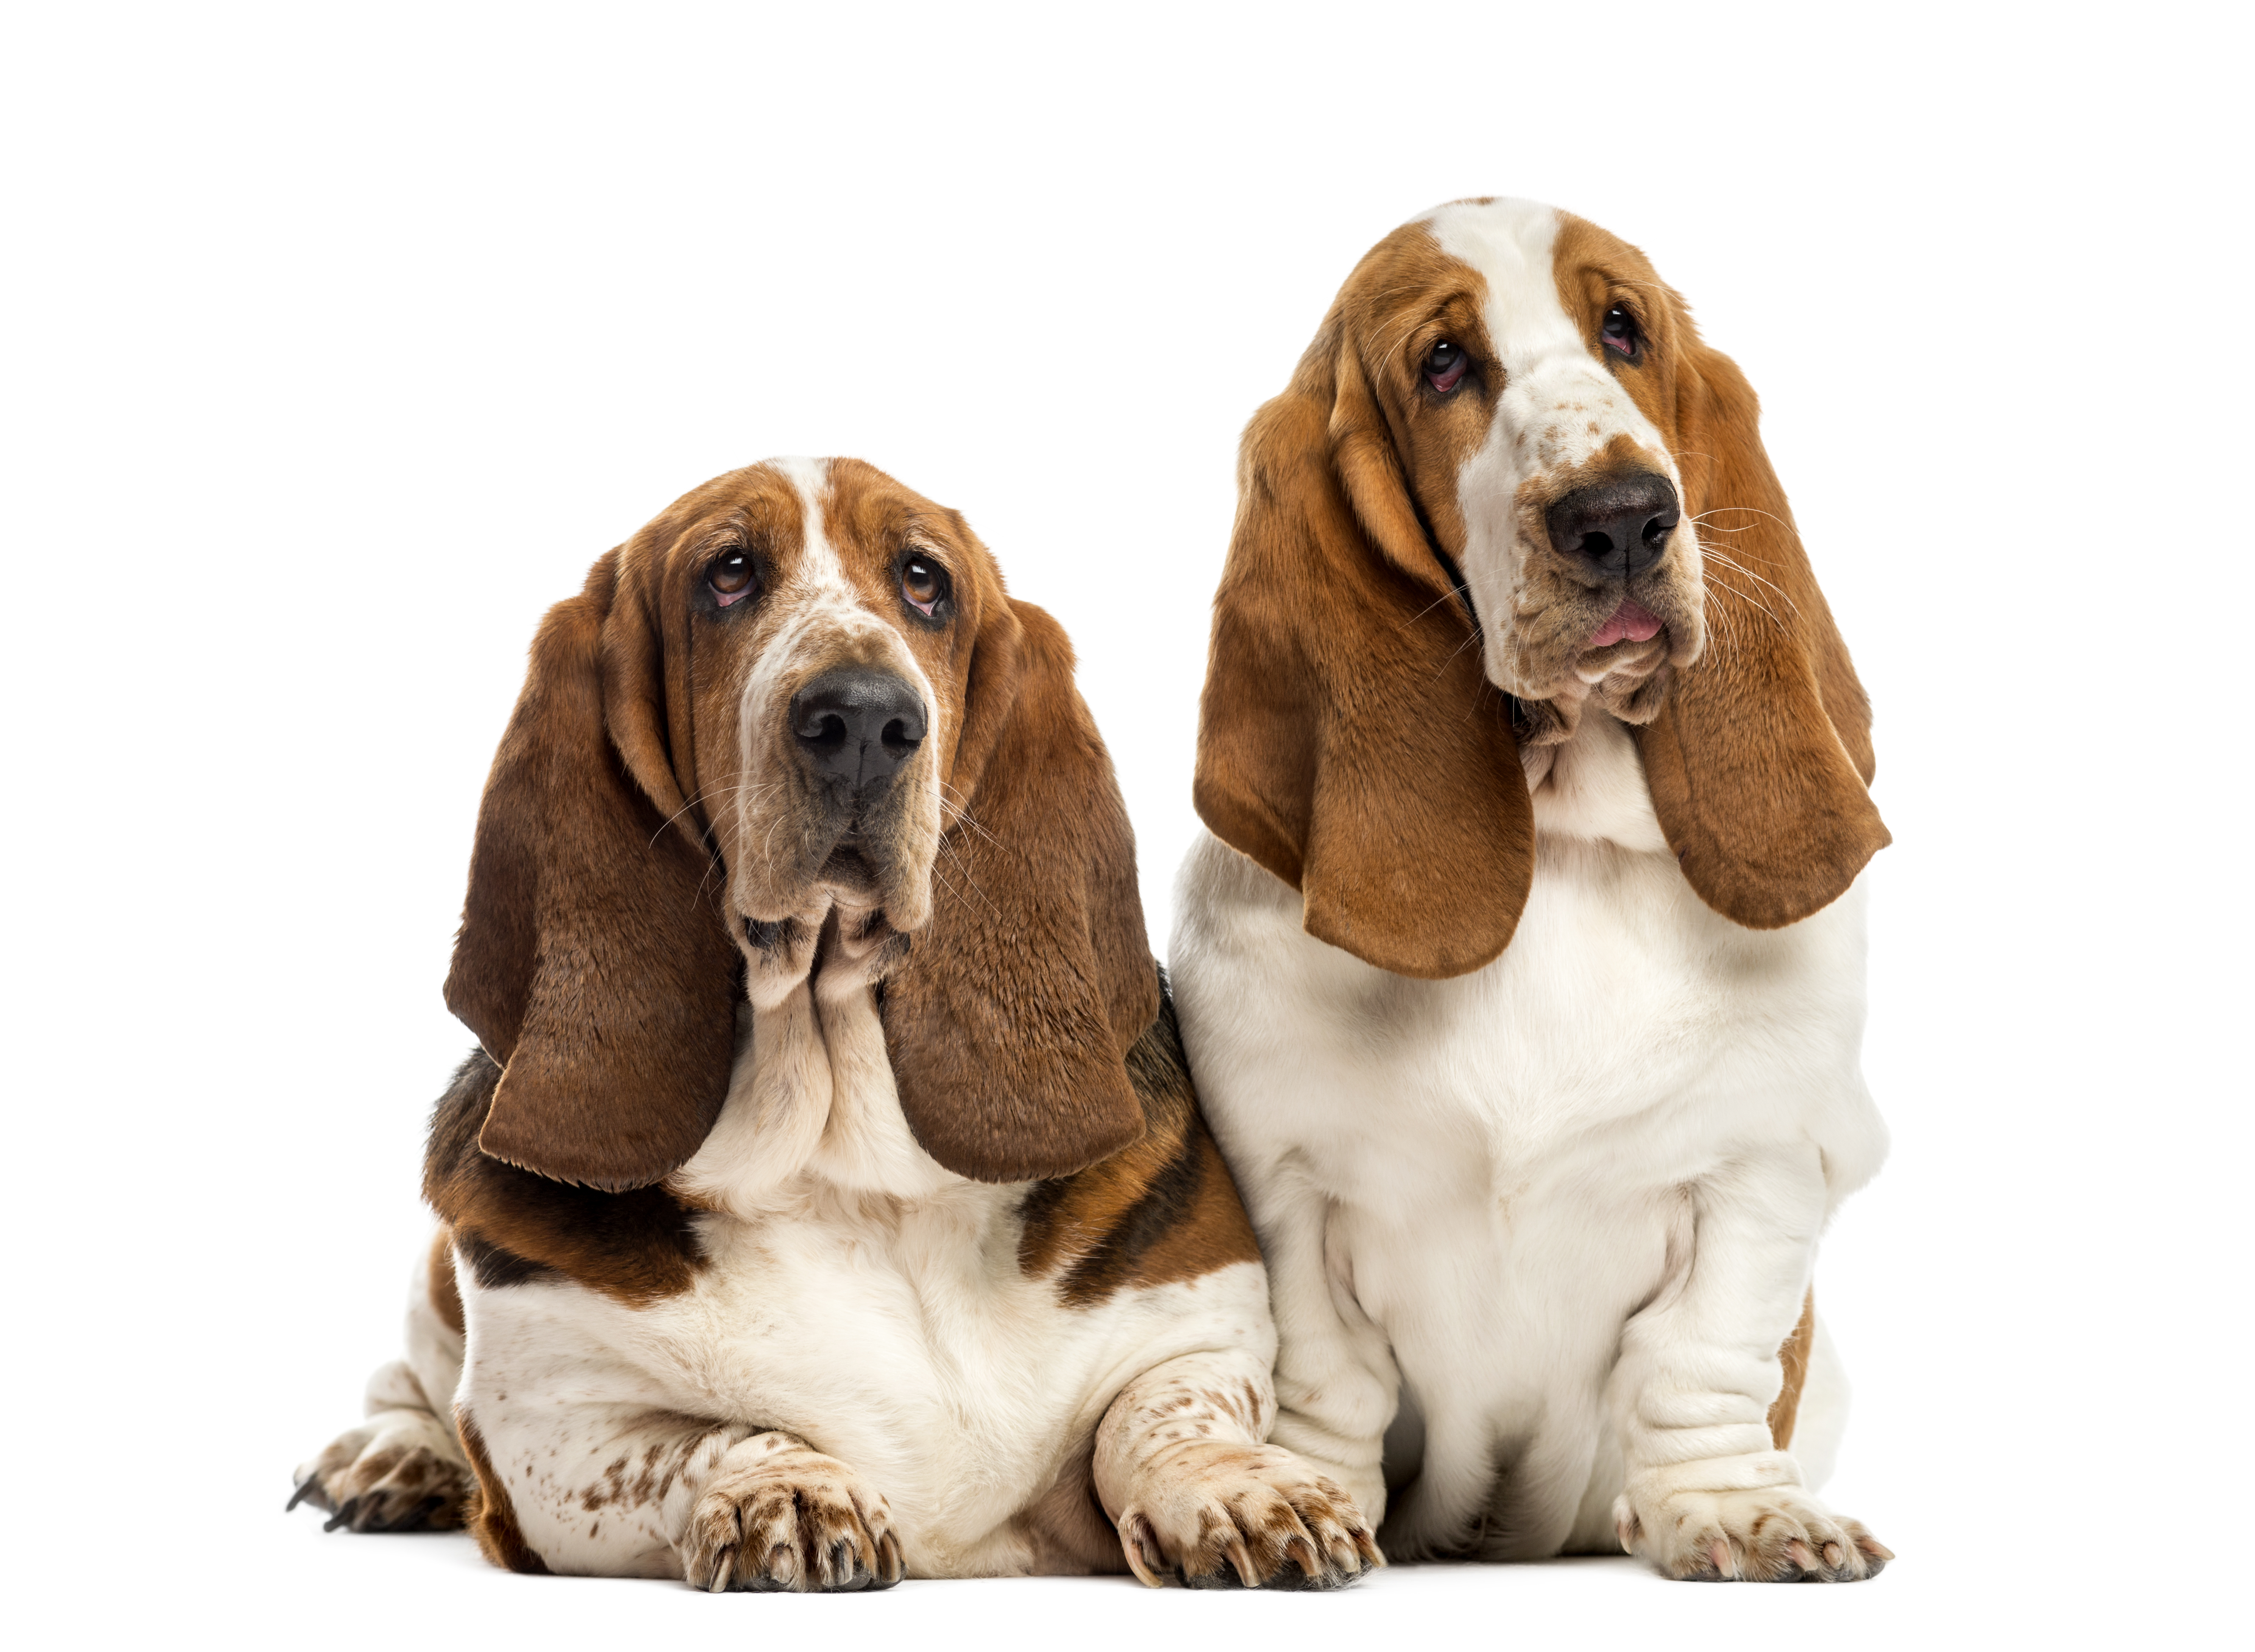 Two Basset Hounds in front of a white background